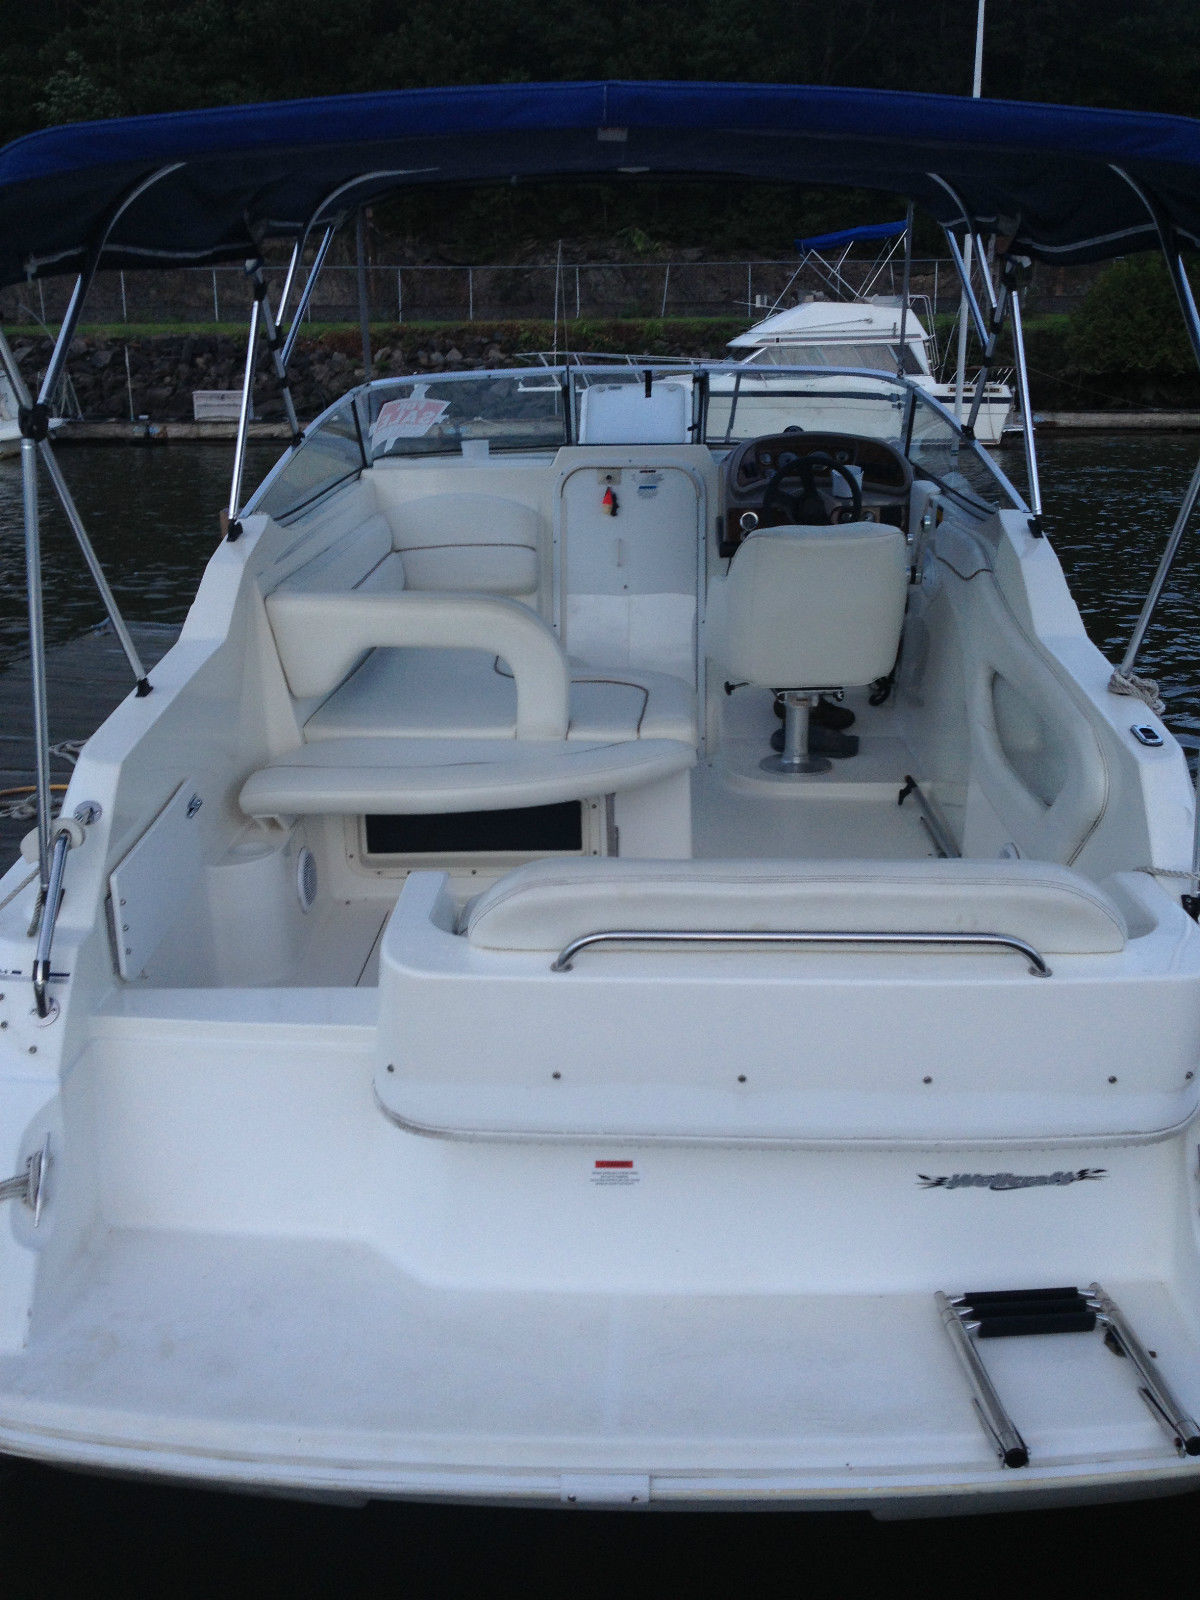 boat for sale: **in stock** new 2020 triple axle 12,600